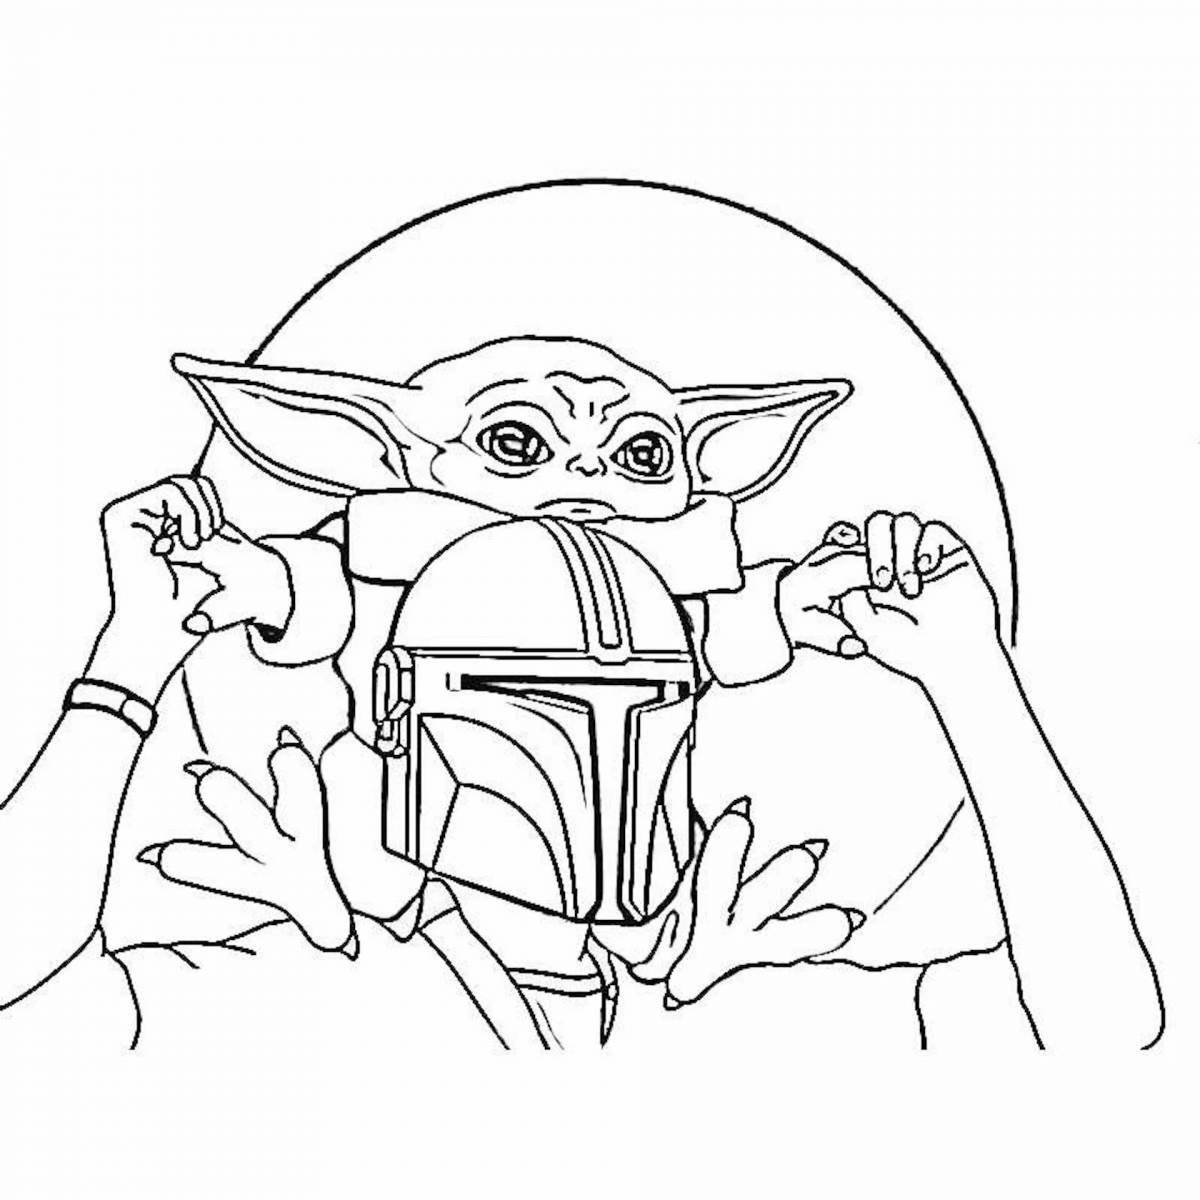 Adorable Star Wars Coloring Book for Kids